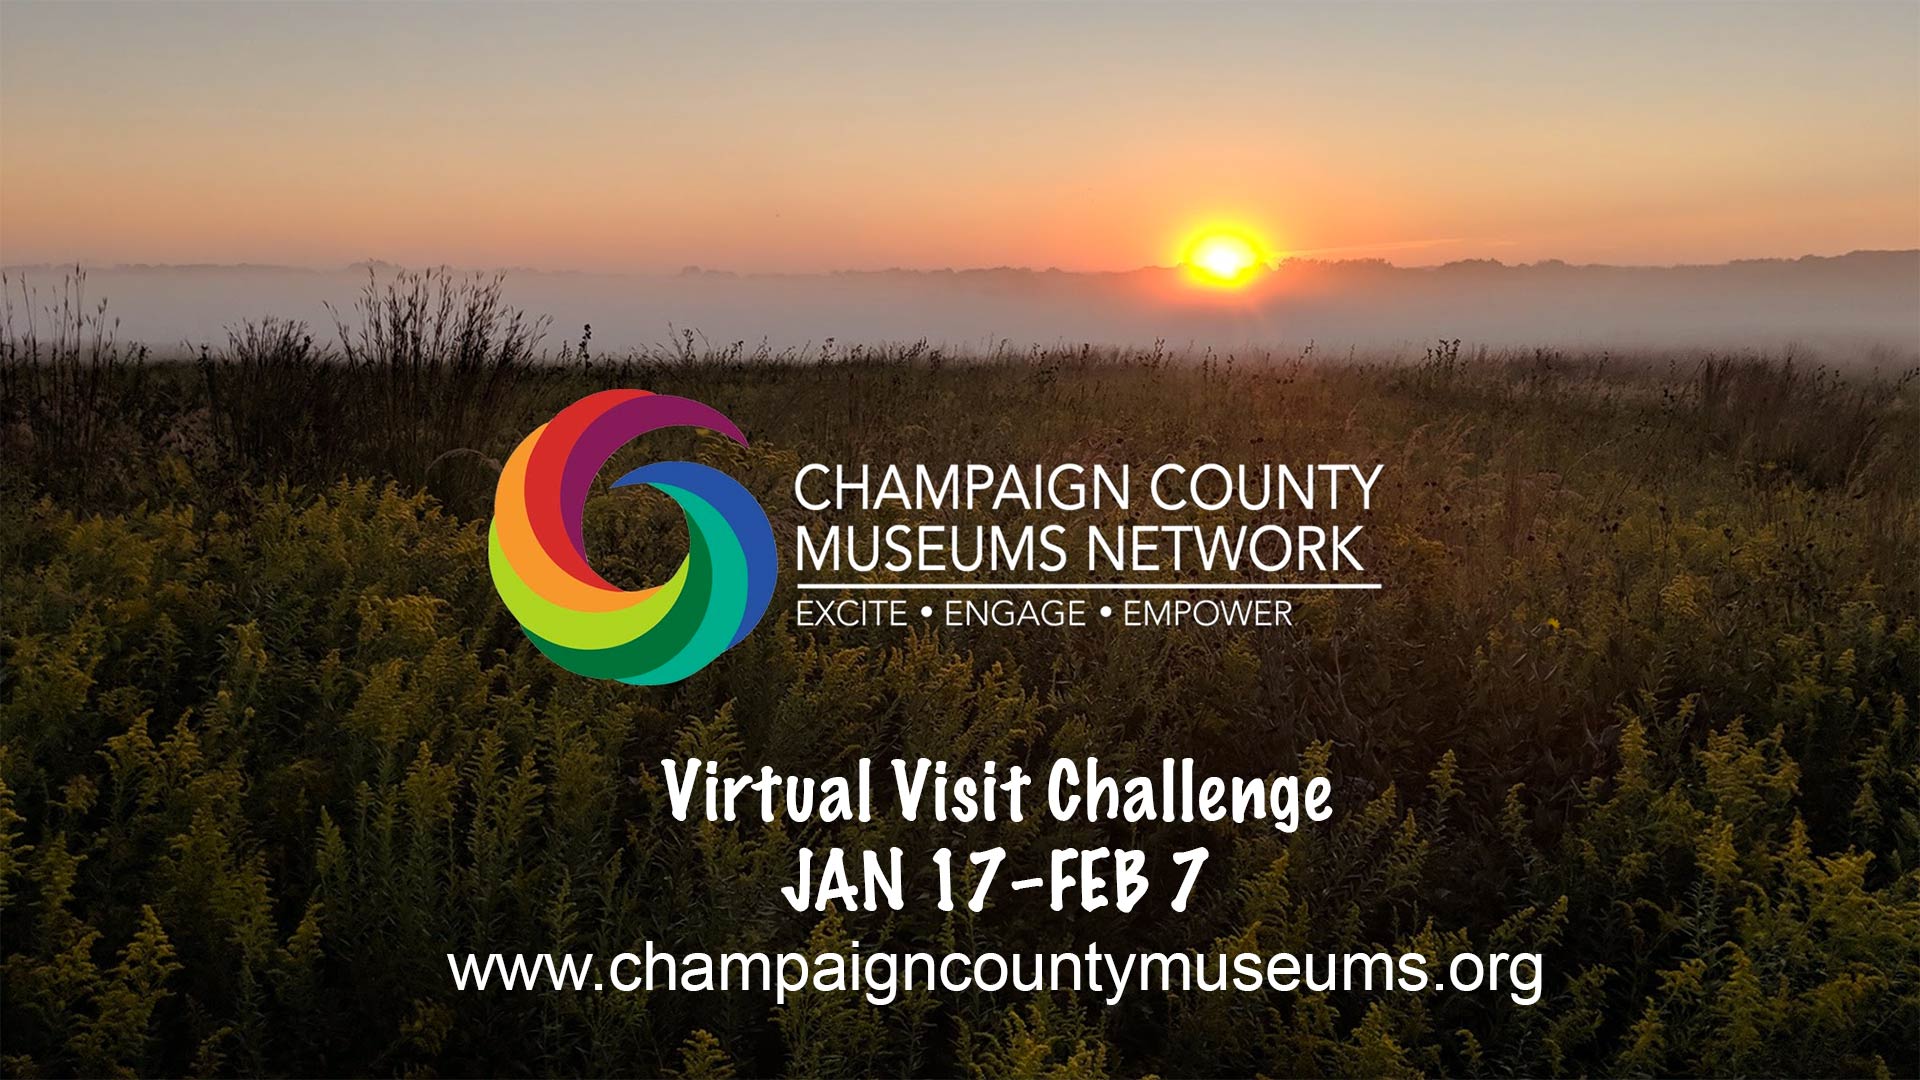 CCMN logo over prairie sunset image with Virtual Visit Challenge text superimposed